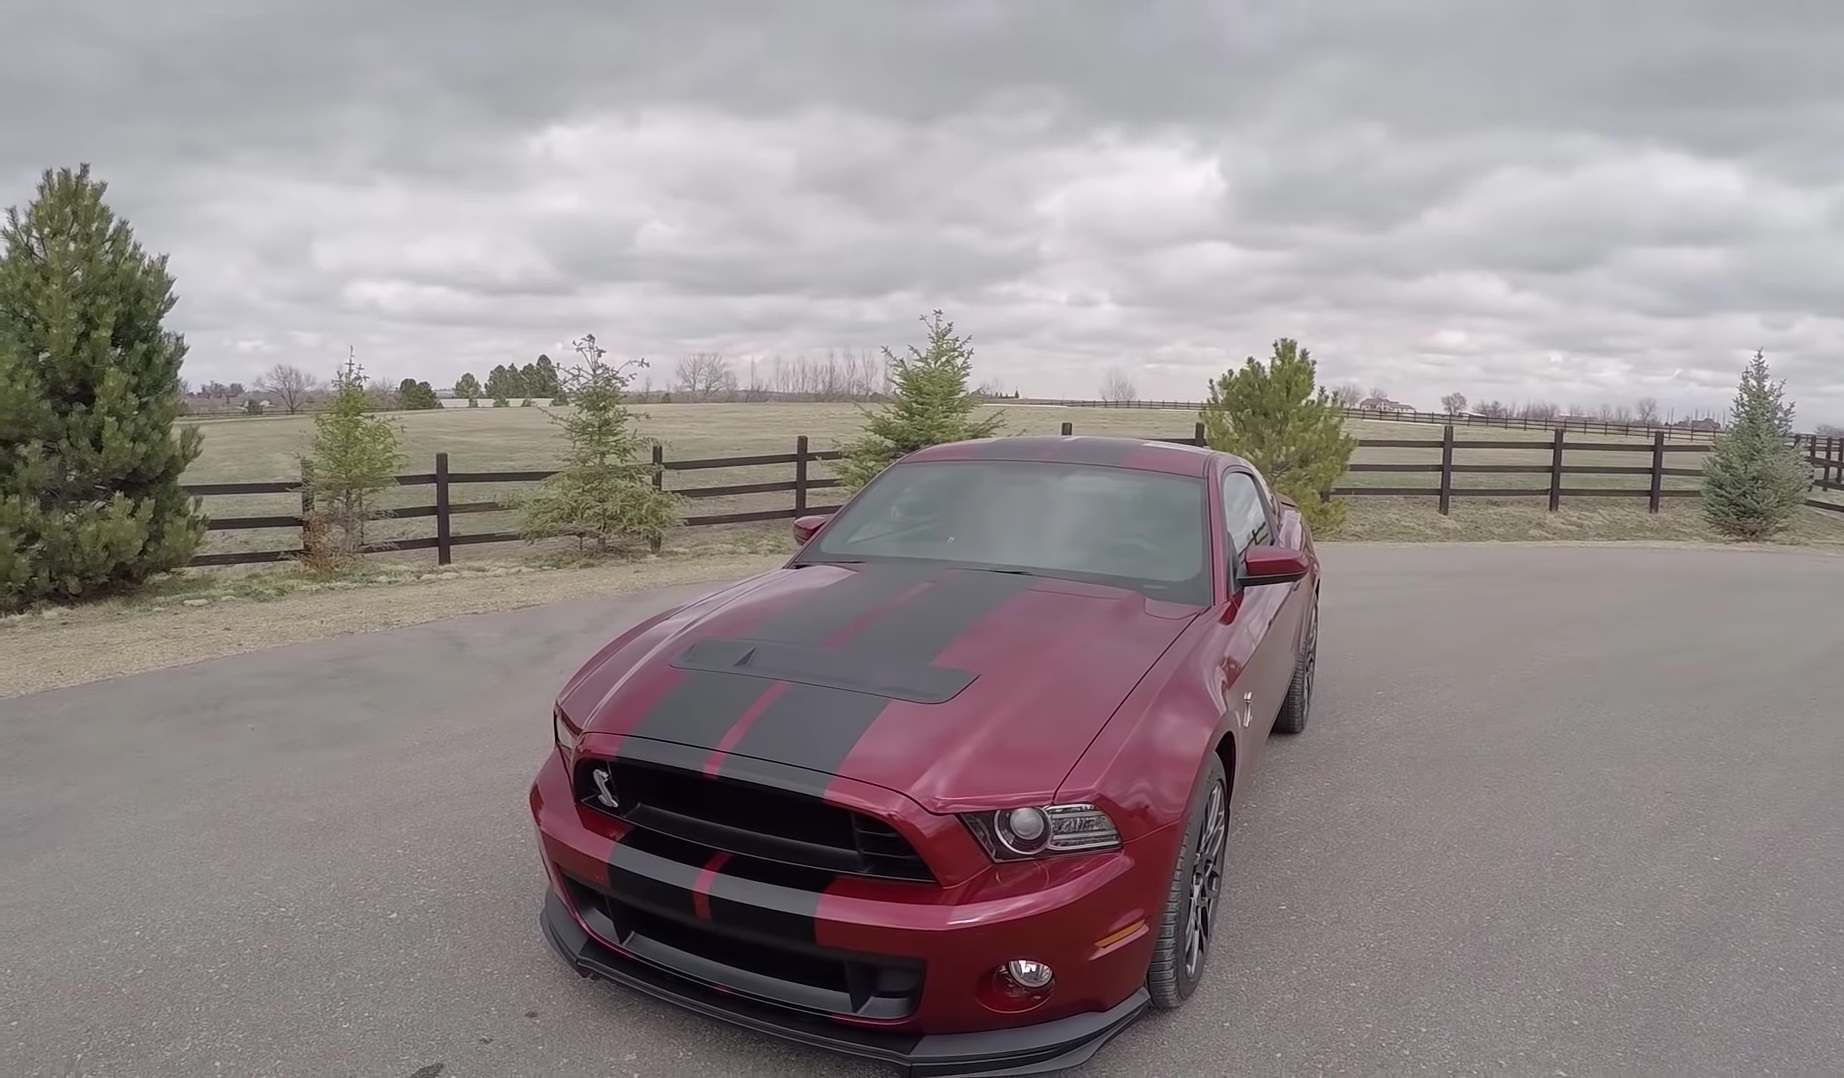 Video: 2014 Ford Mustang Shelby GT500 Full Review